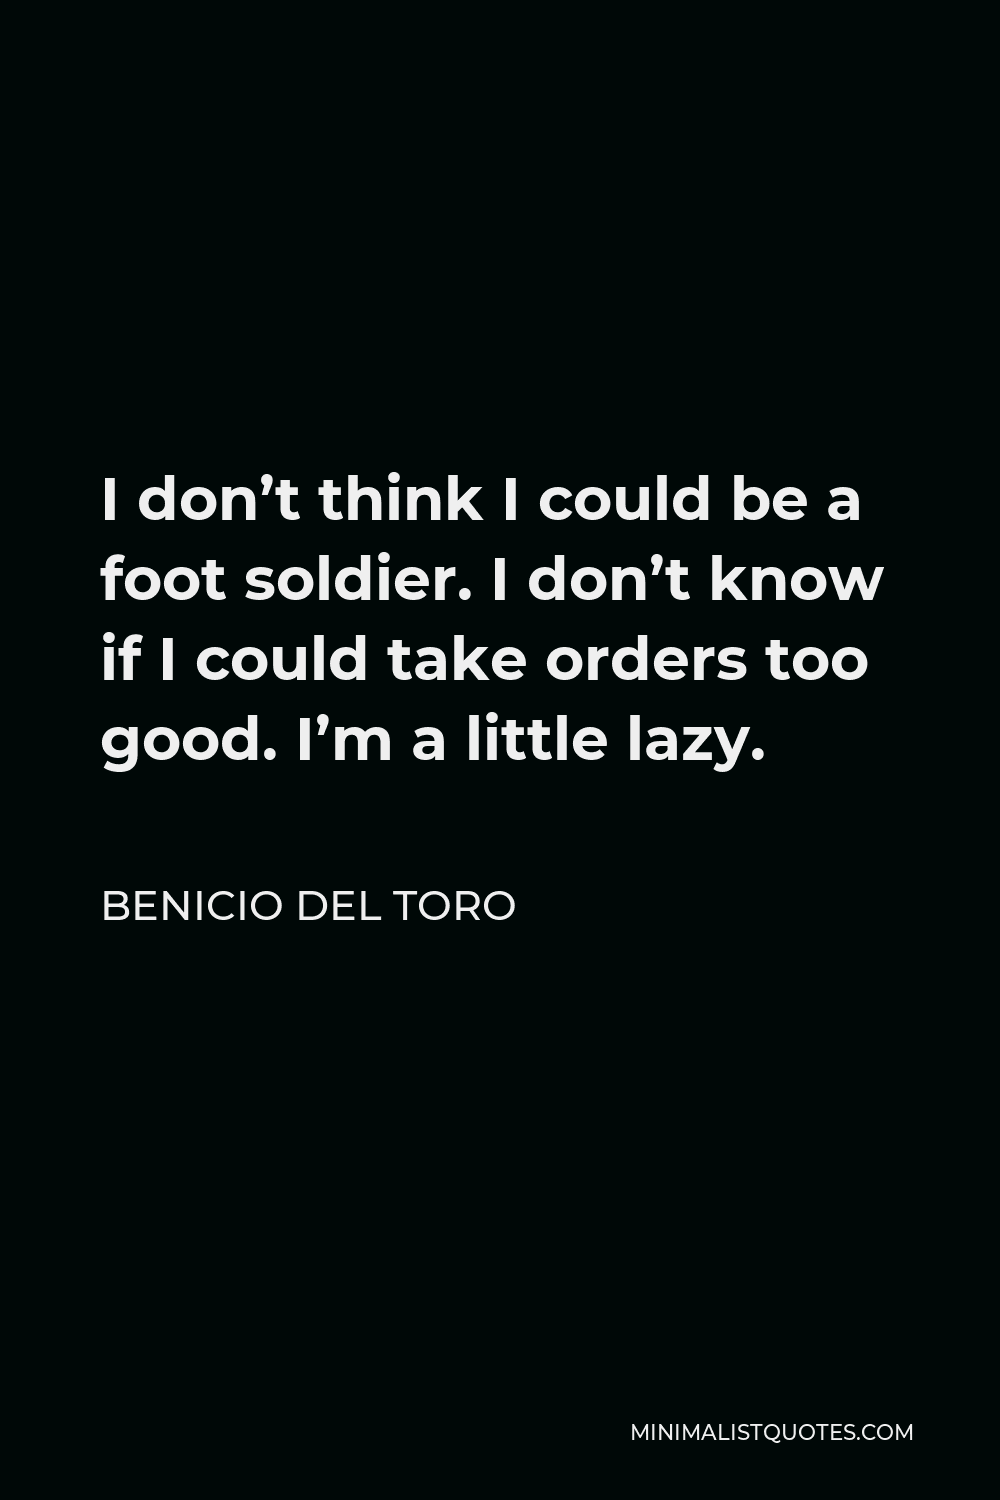 Benicio Del Toro Quote - I don’t think I could be a foot soldier. I don’t know if I could take orders too good. I’m a little lazy.